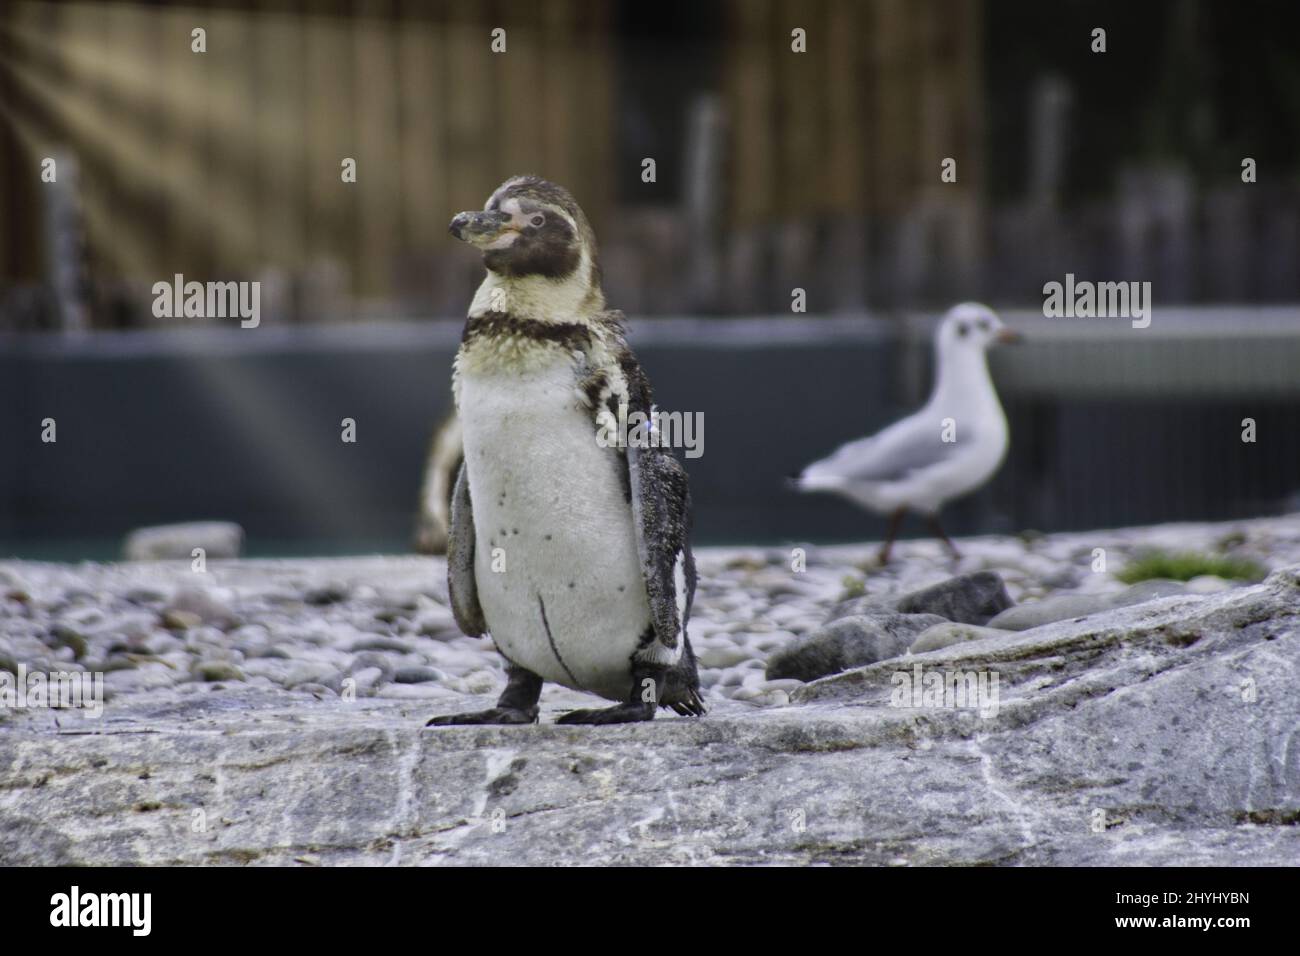 Shallow focus shot of a humboldt penguin standing on rocks and a black-headed gull walking behind it Stock Photo